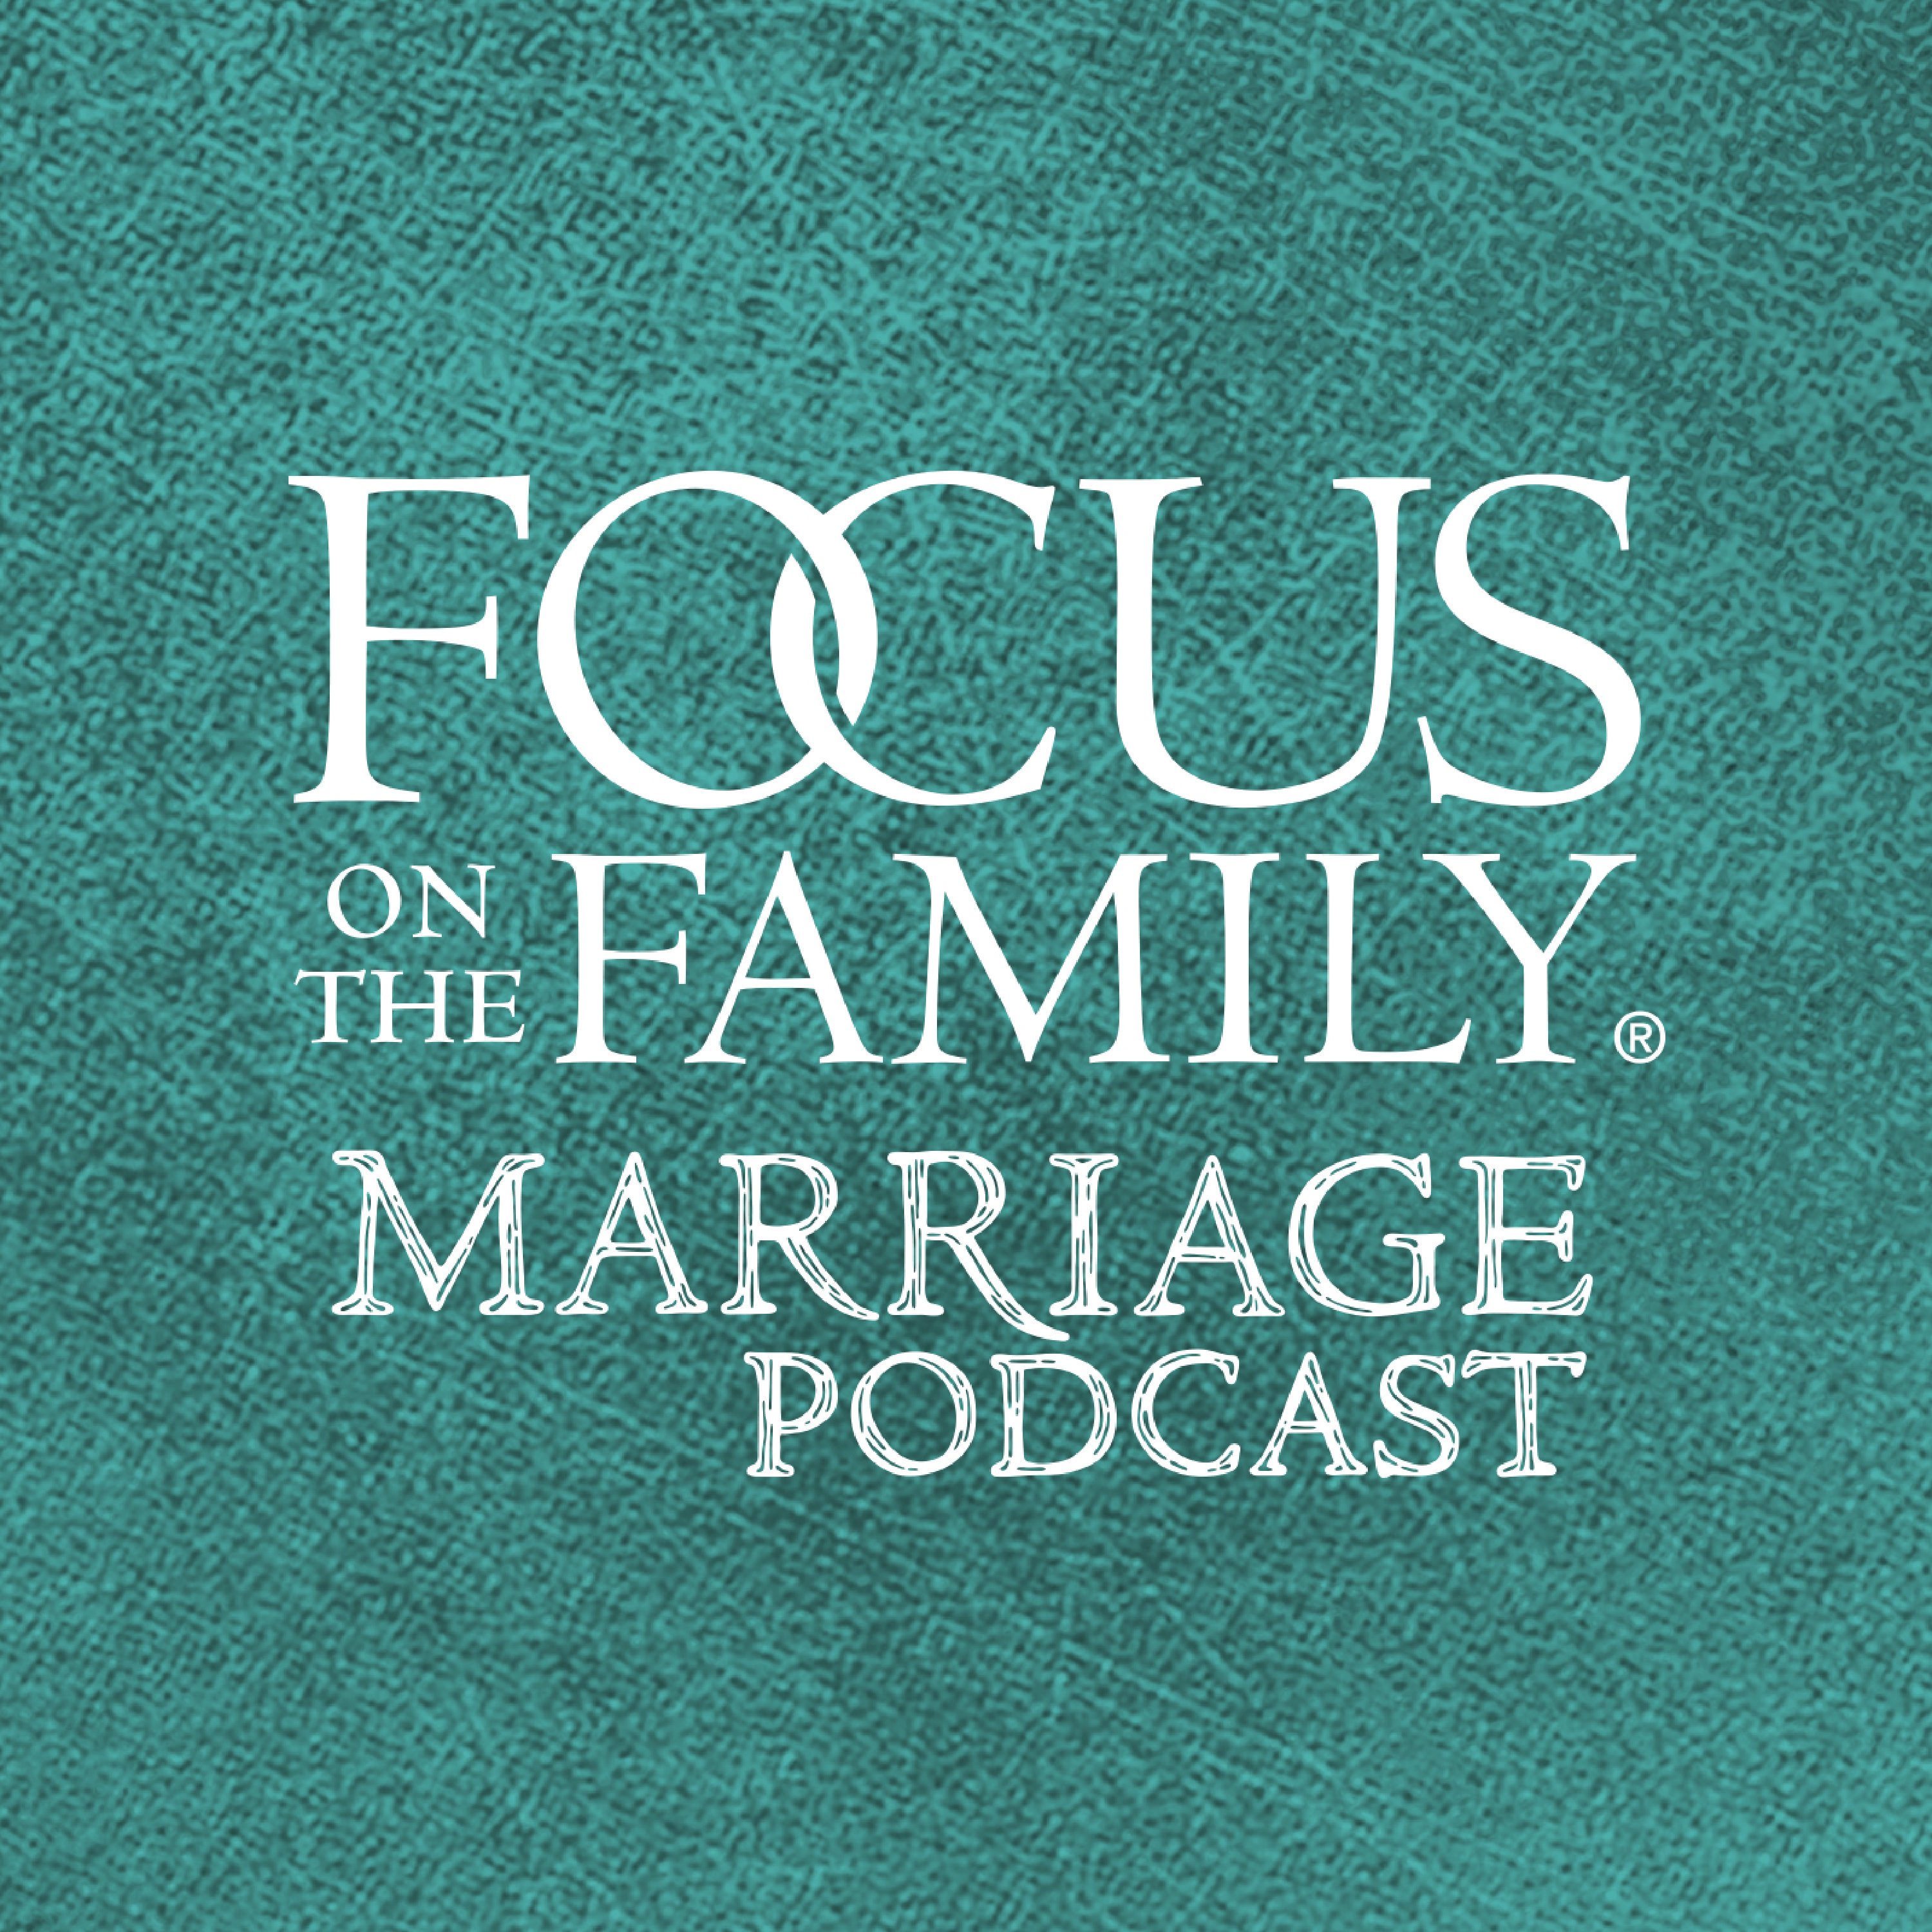 Focus on Marriage Podcast pic